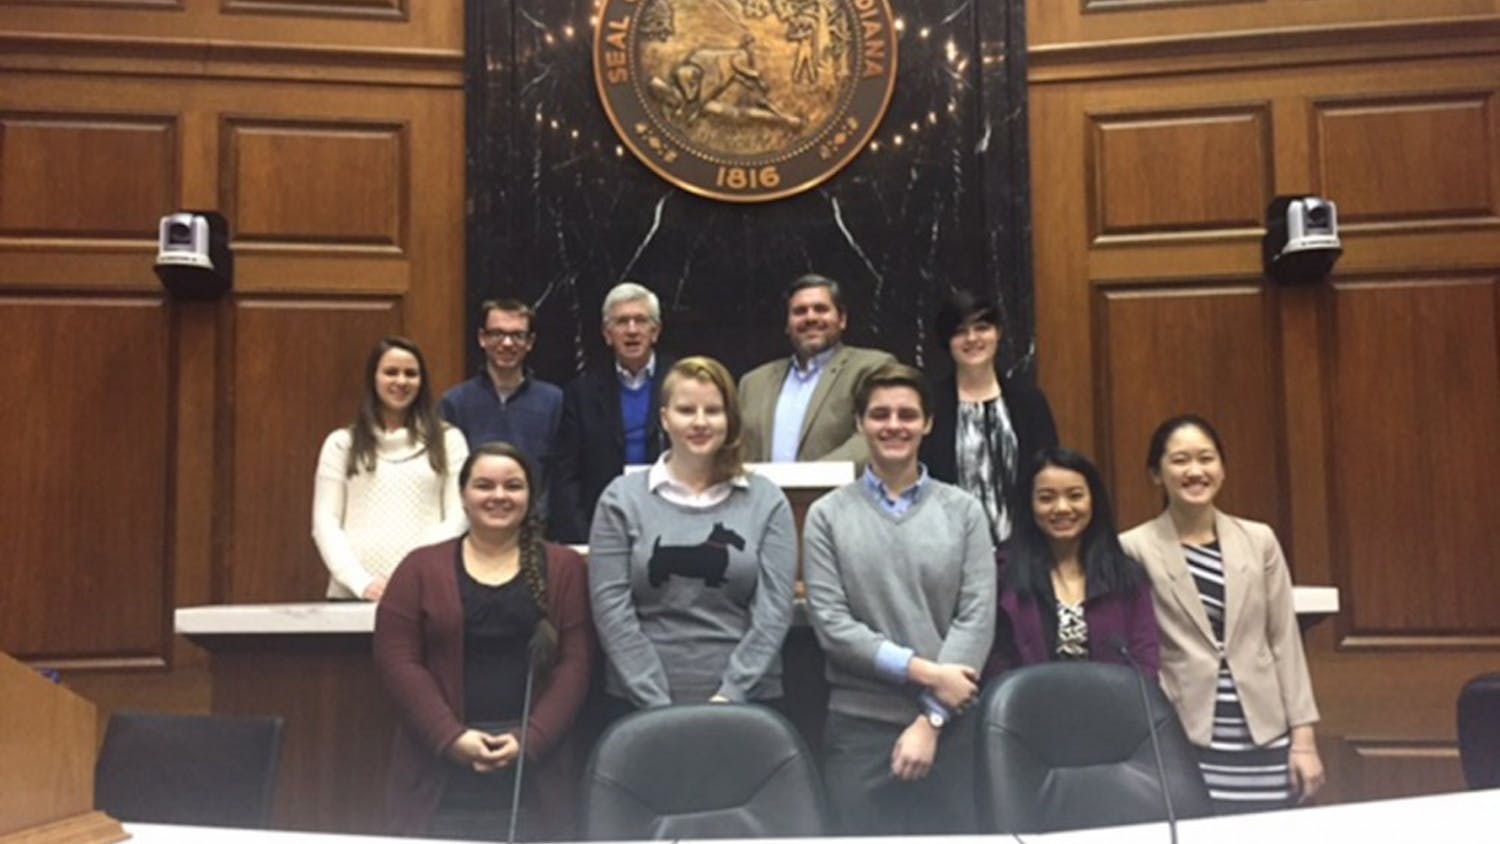 Eight of the high school and college New Voices of Indiana team members meet at the Indiana Statehouse, Wednesday, Dec. 7 to draft legislation for a press freedoms bill. They met with stakeholders who would be interested in the legislation.